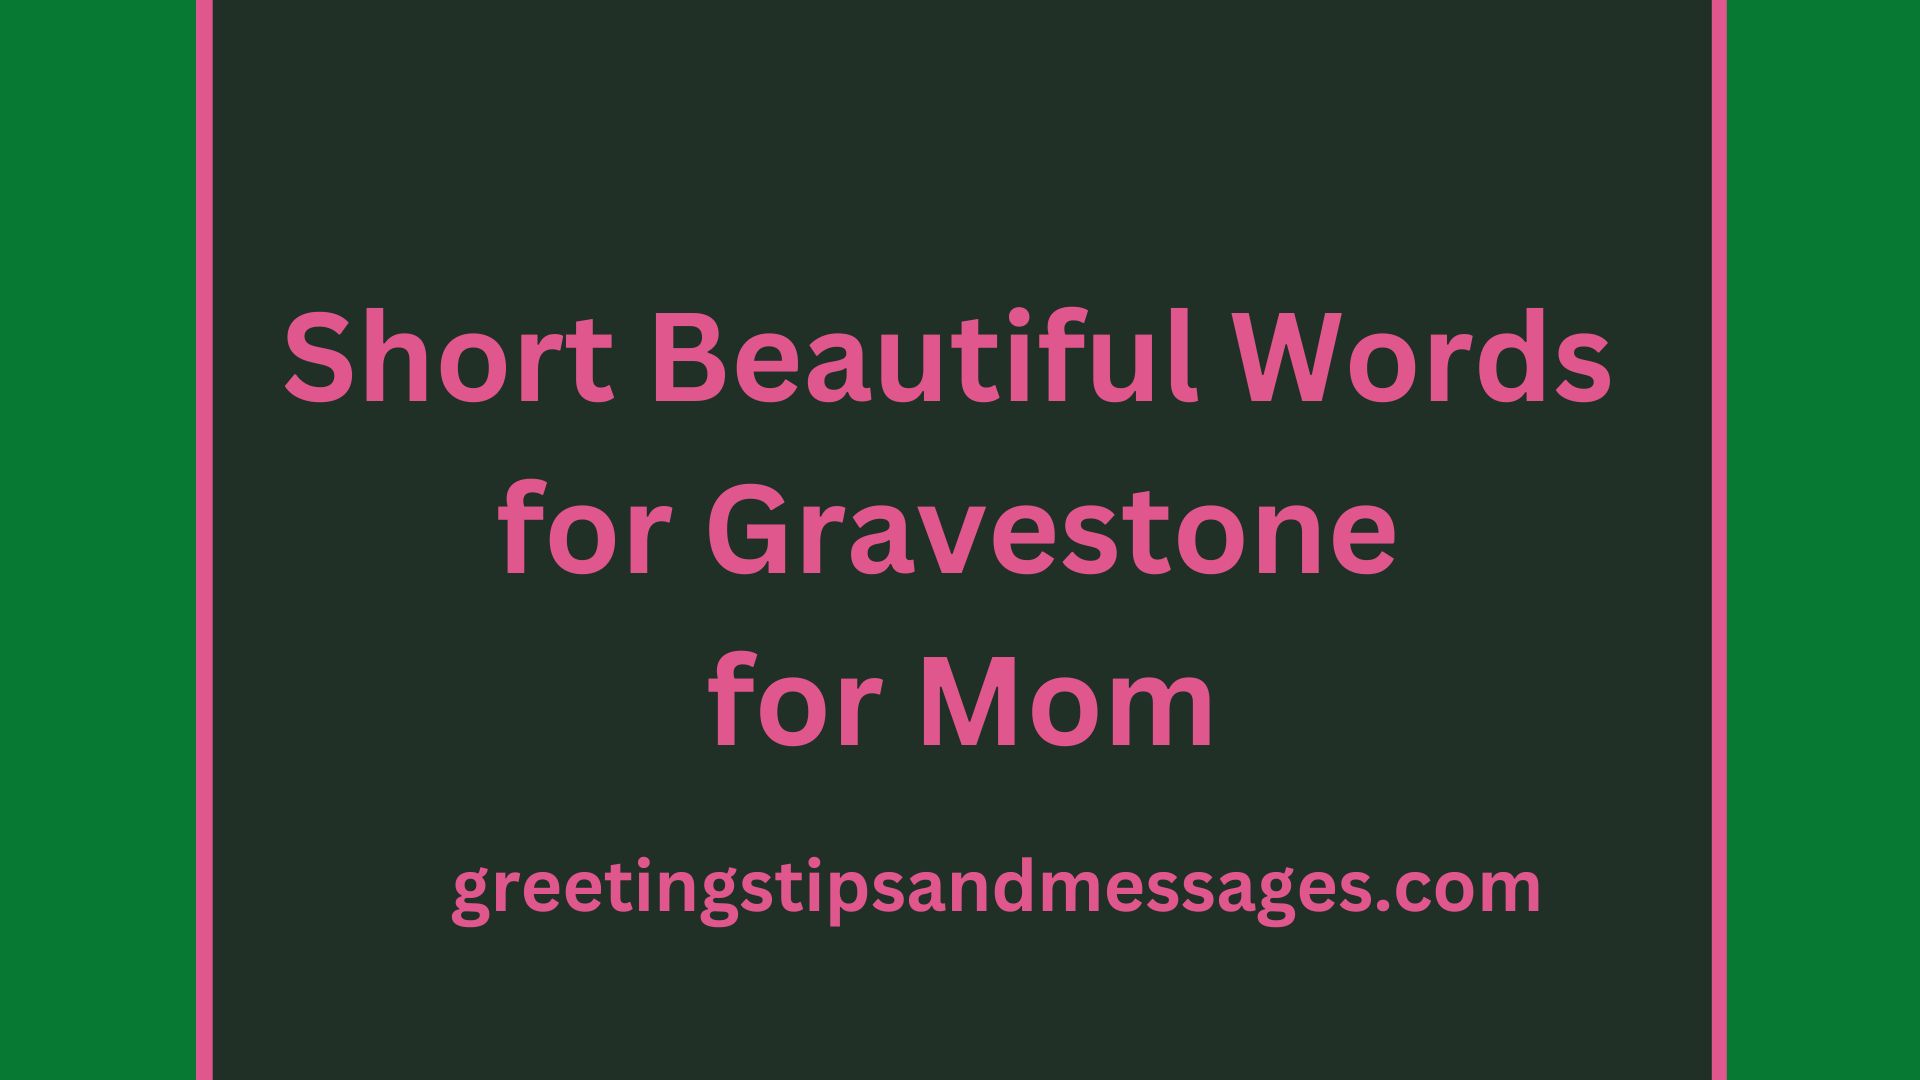 Short Beautiful Words for Gravestone for Mom